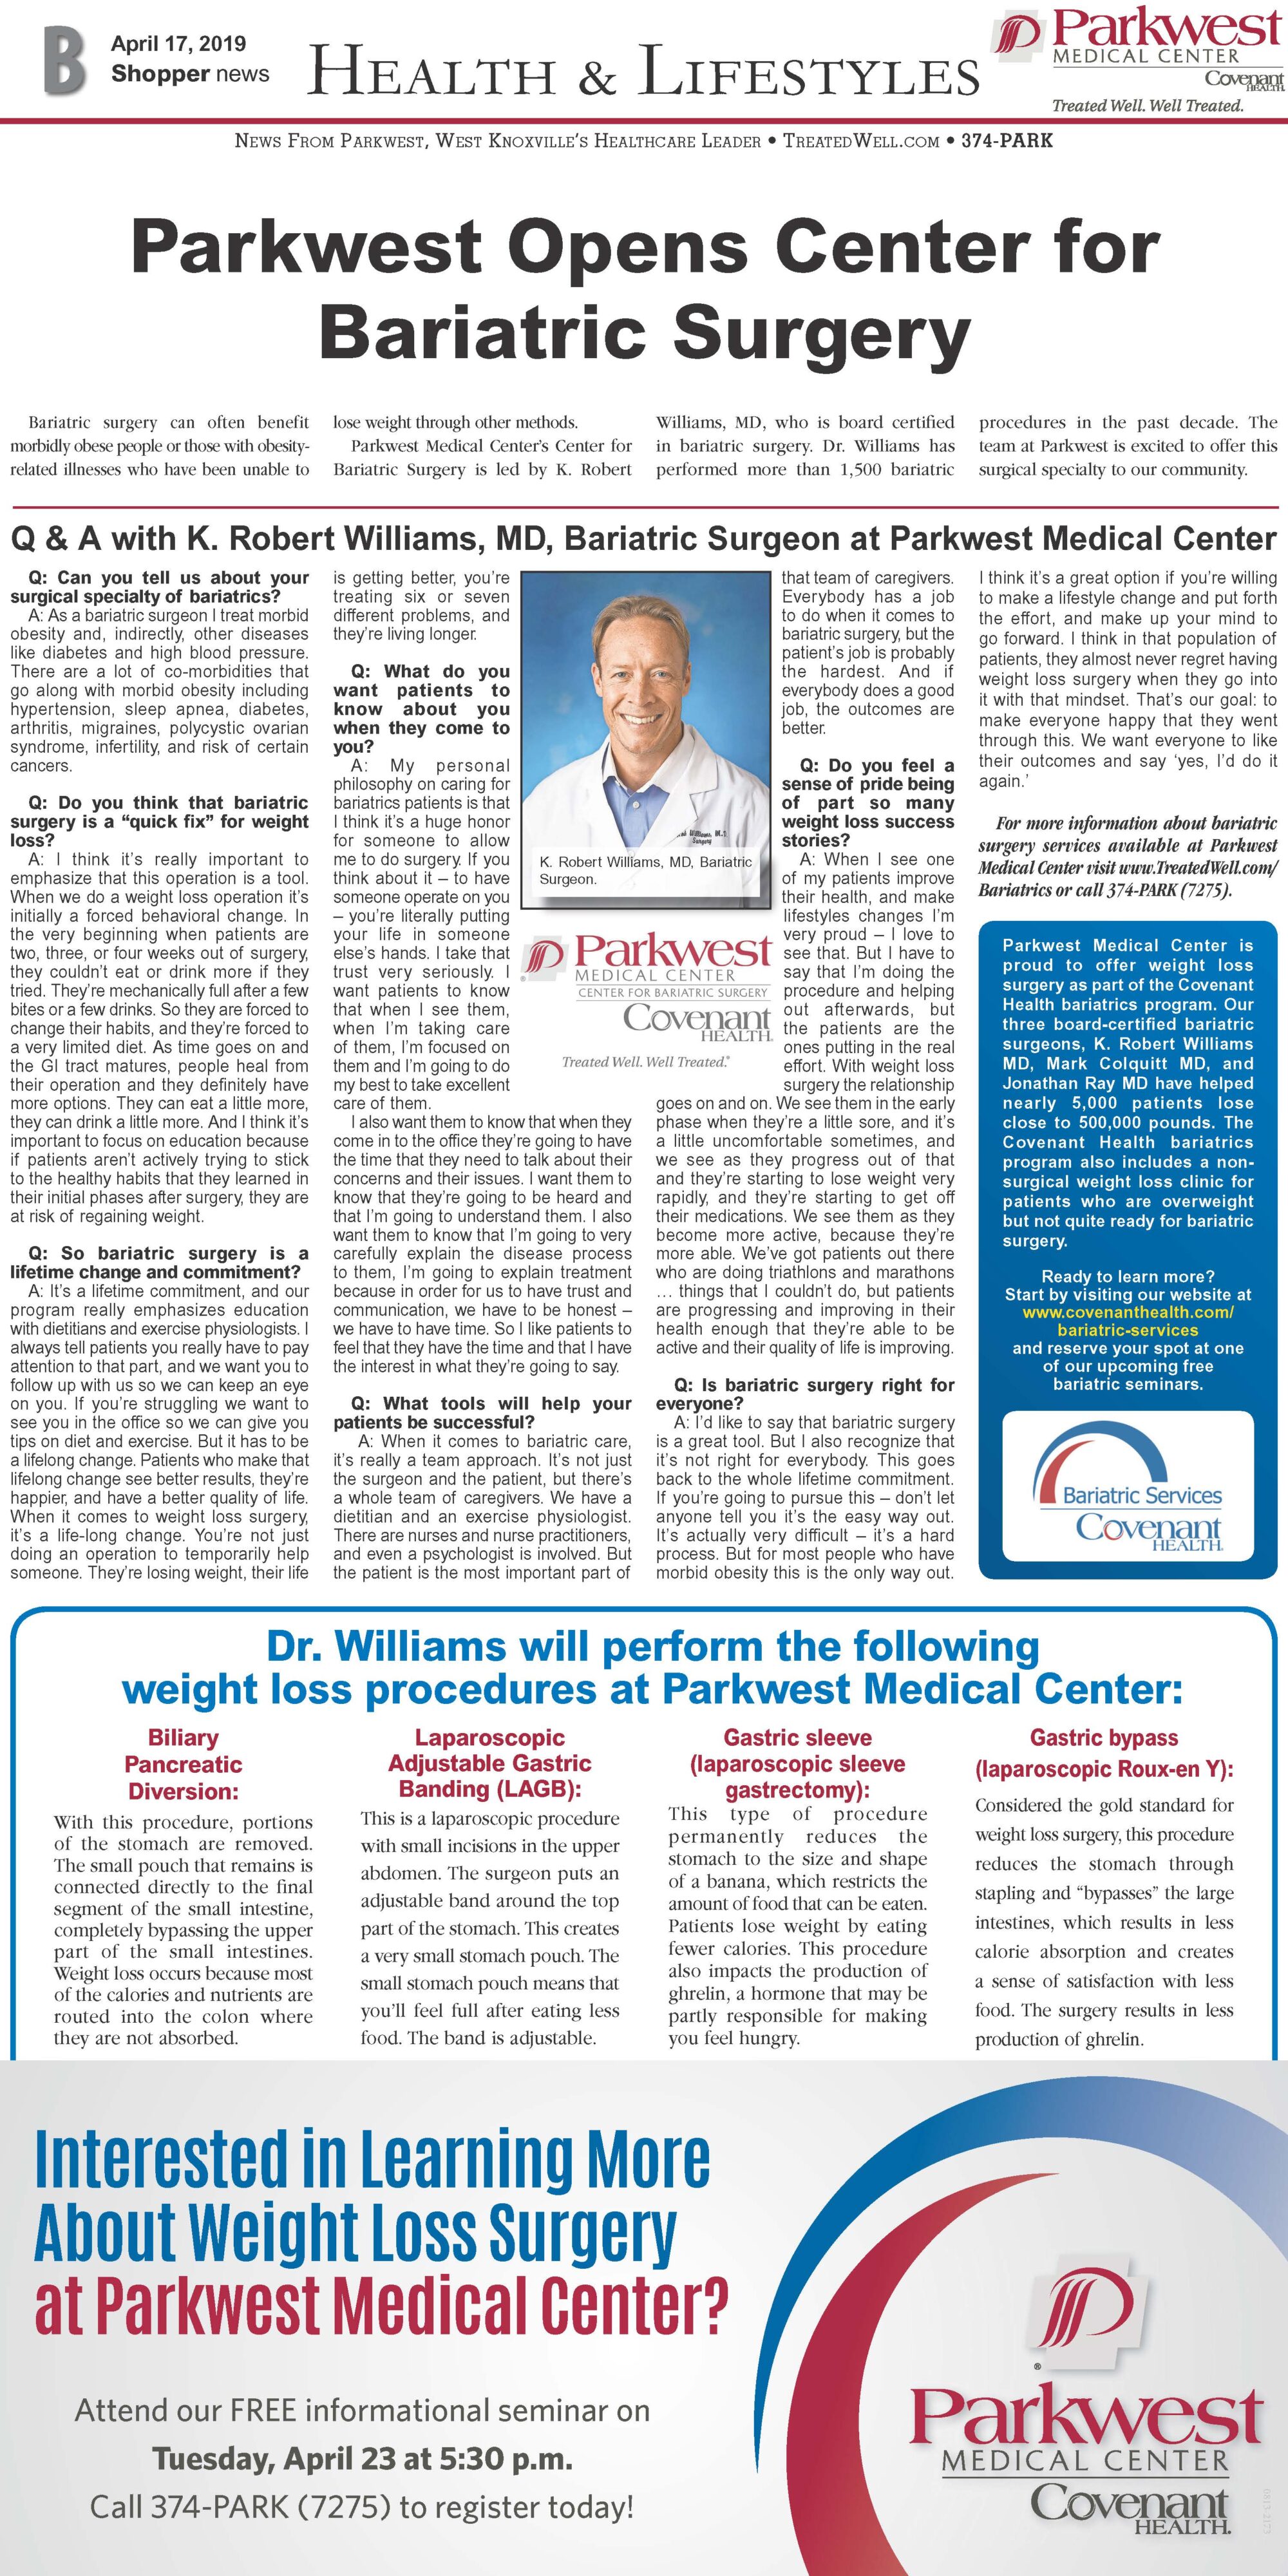 Copy of 4.17.19 Health & Lifestyles shopper edition about bariatric surgery.